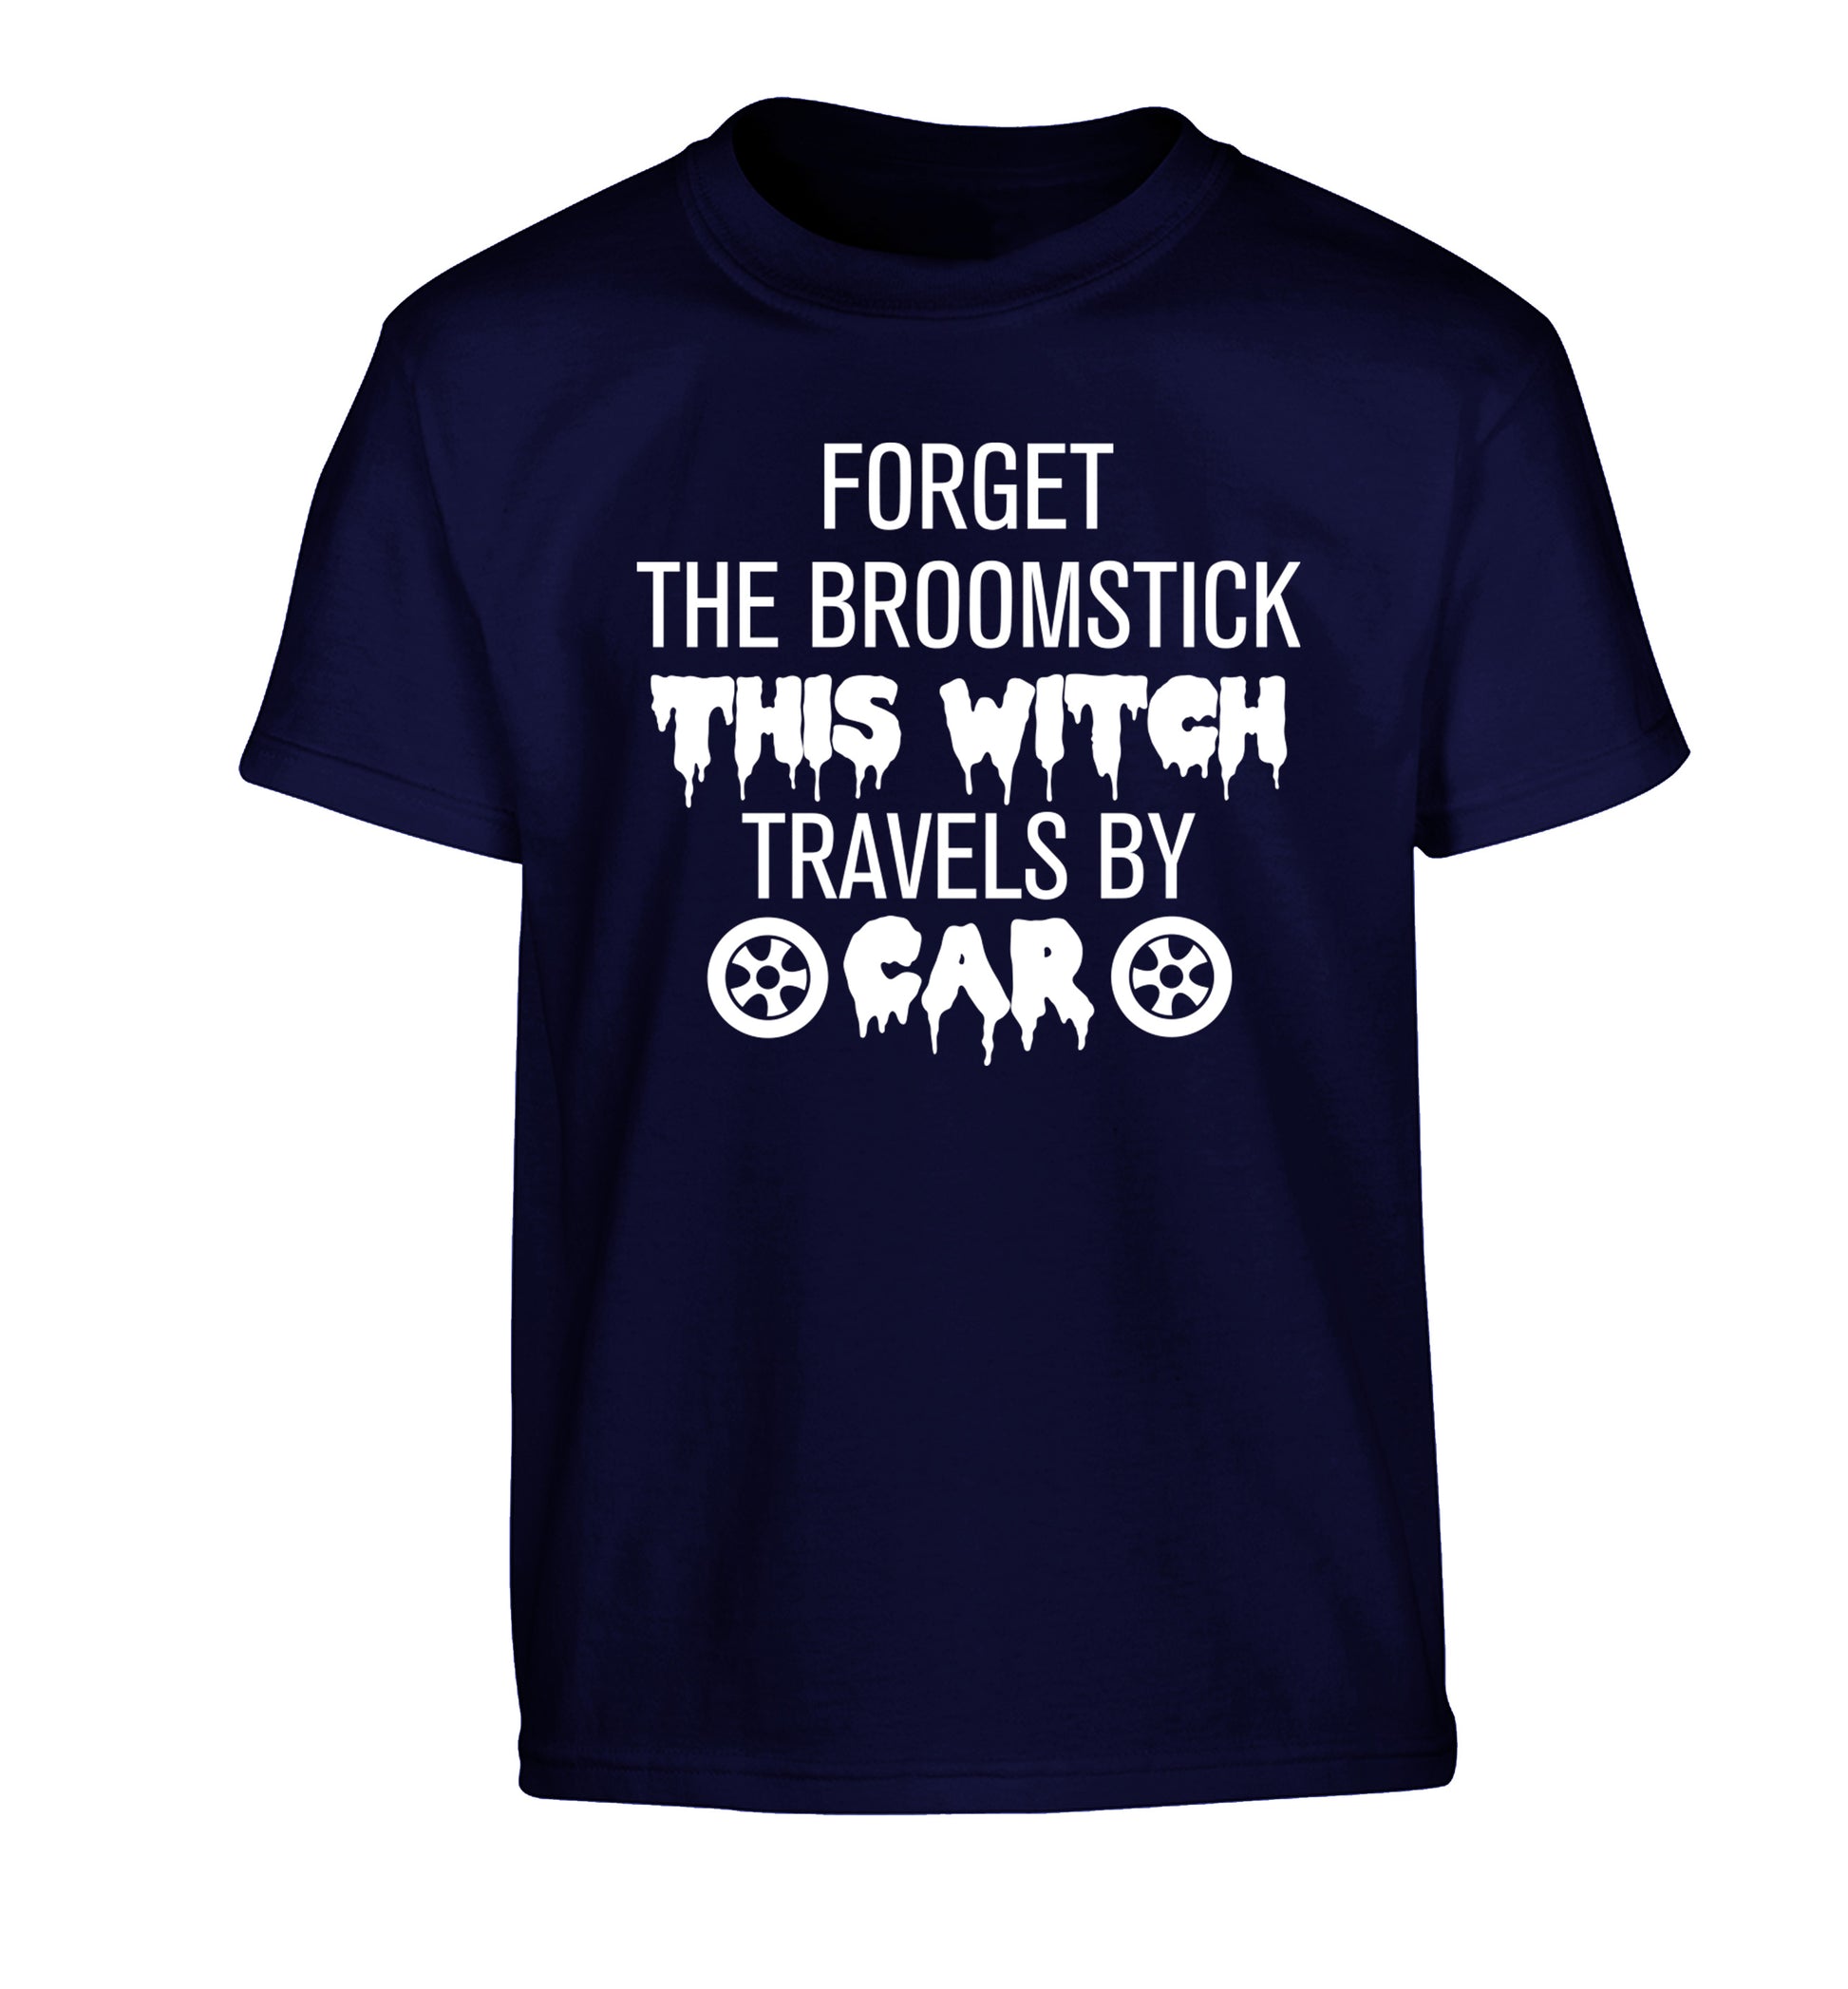 Forget the broomstick this witch travels by car Children's navy Tshirt 12-14 Years